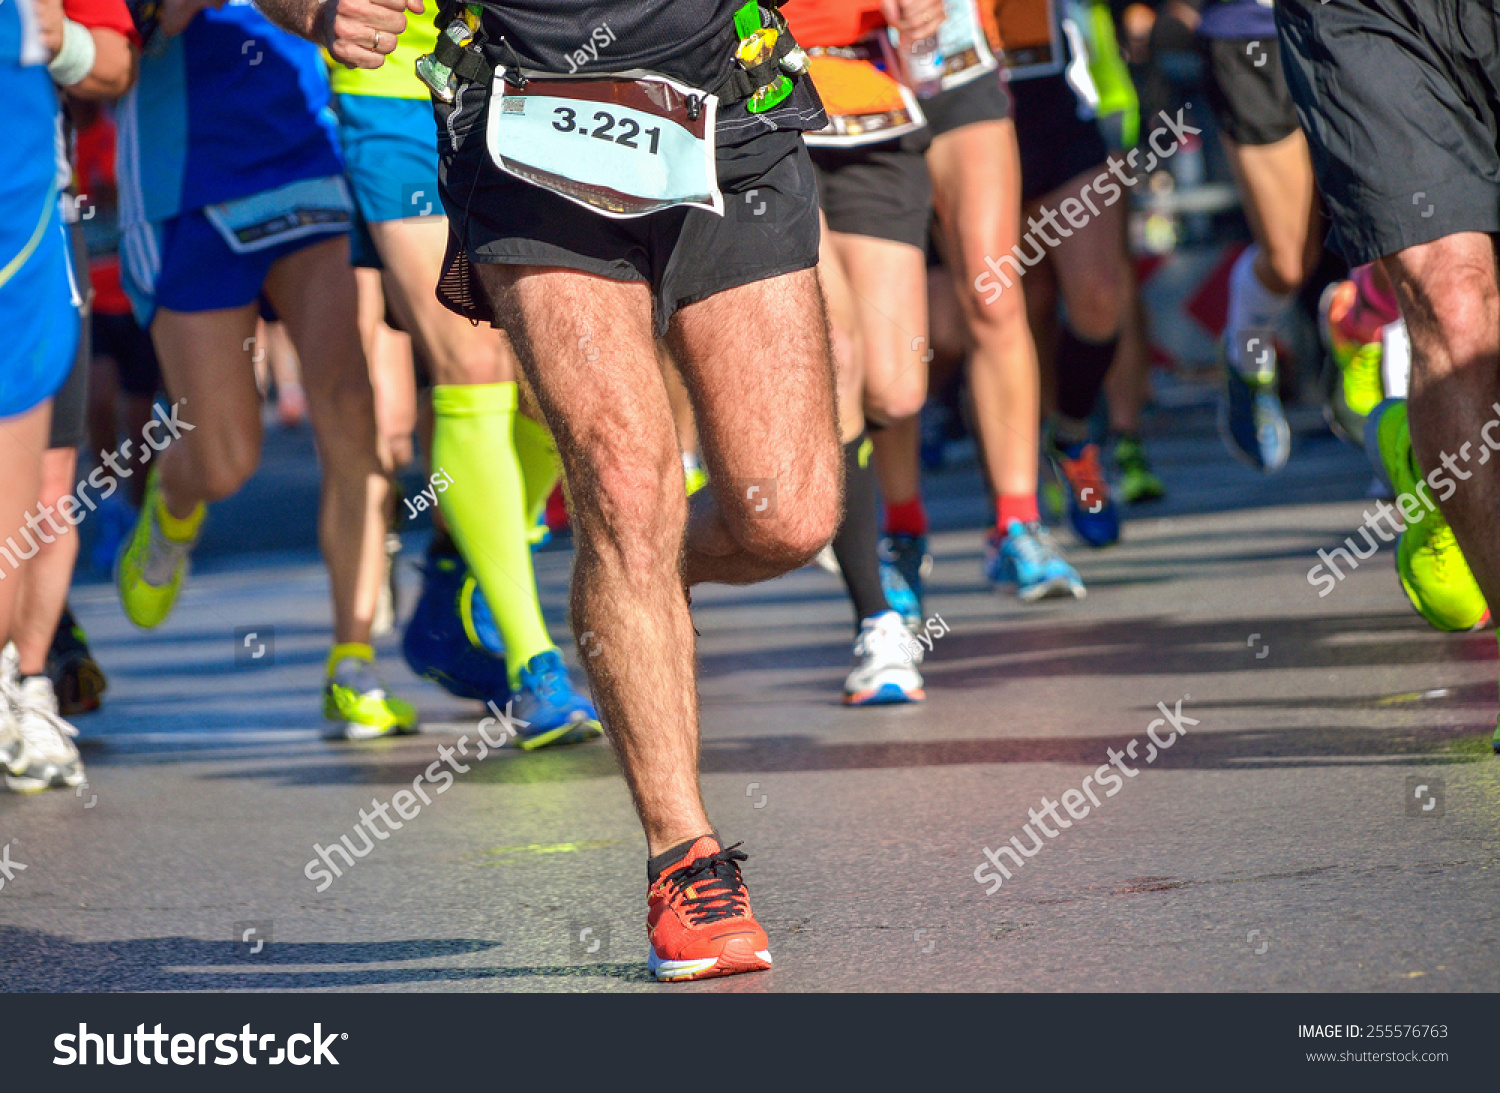 Marathon running race, people feet on road, sport, fitness and healthy lifestyle concept
 #255576763